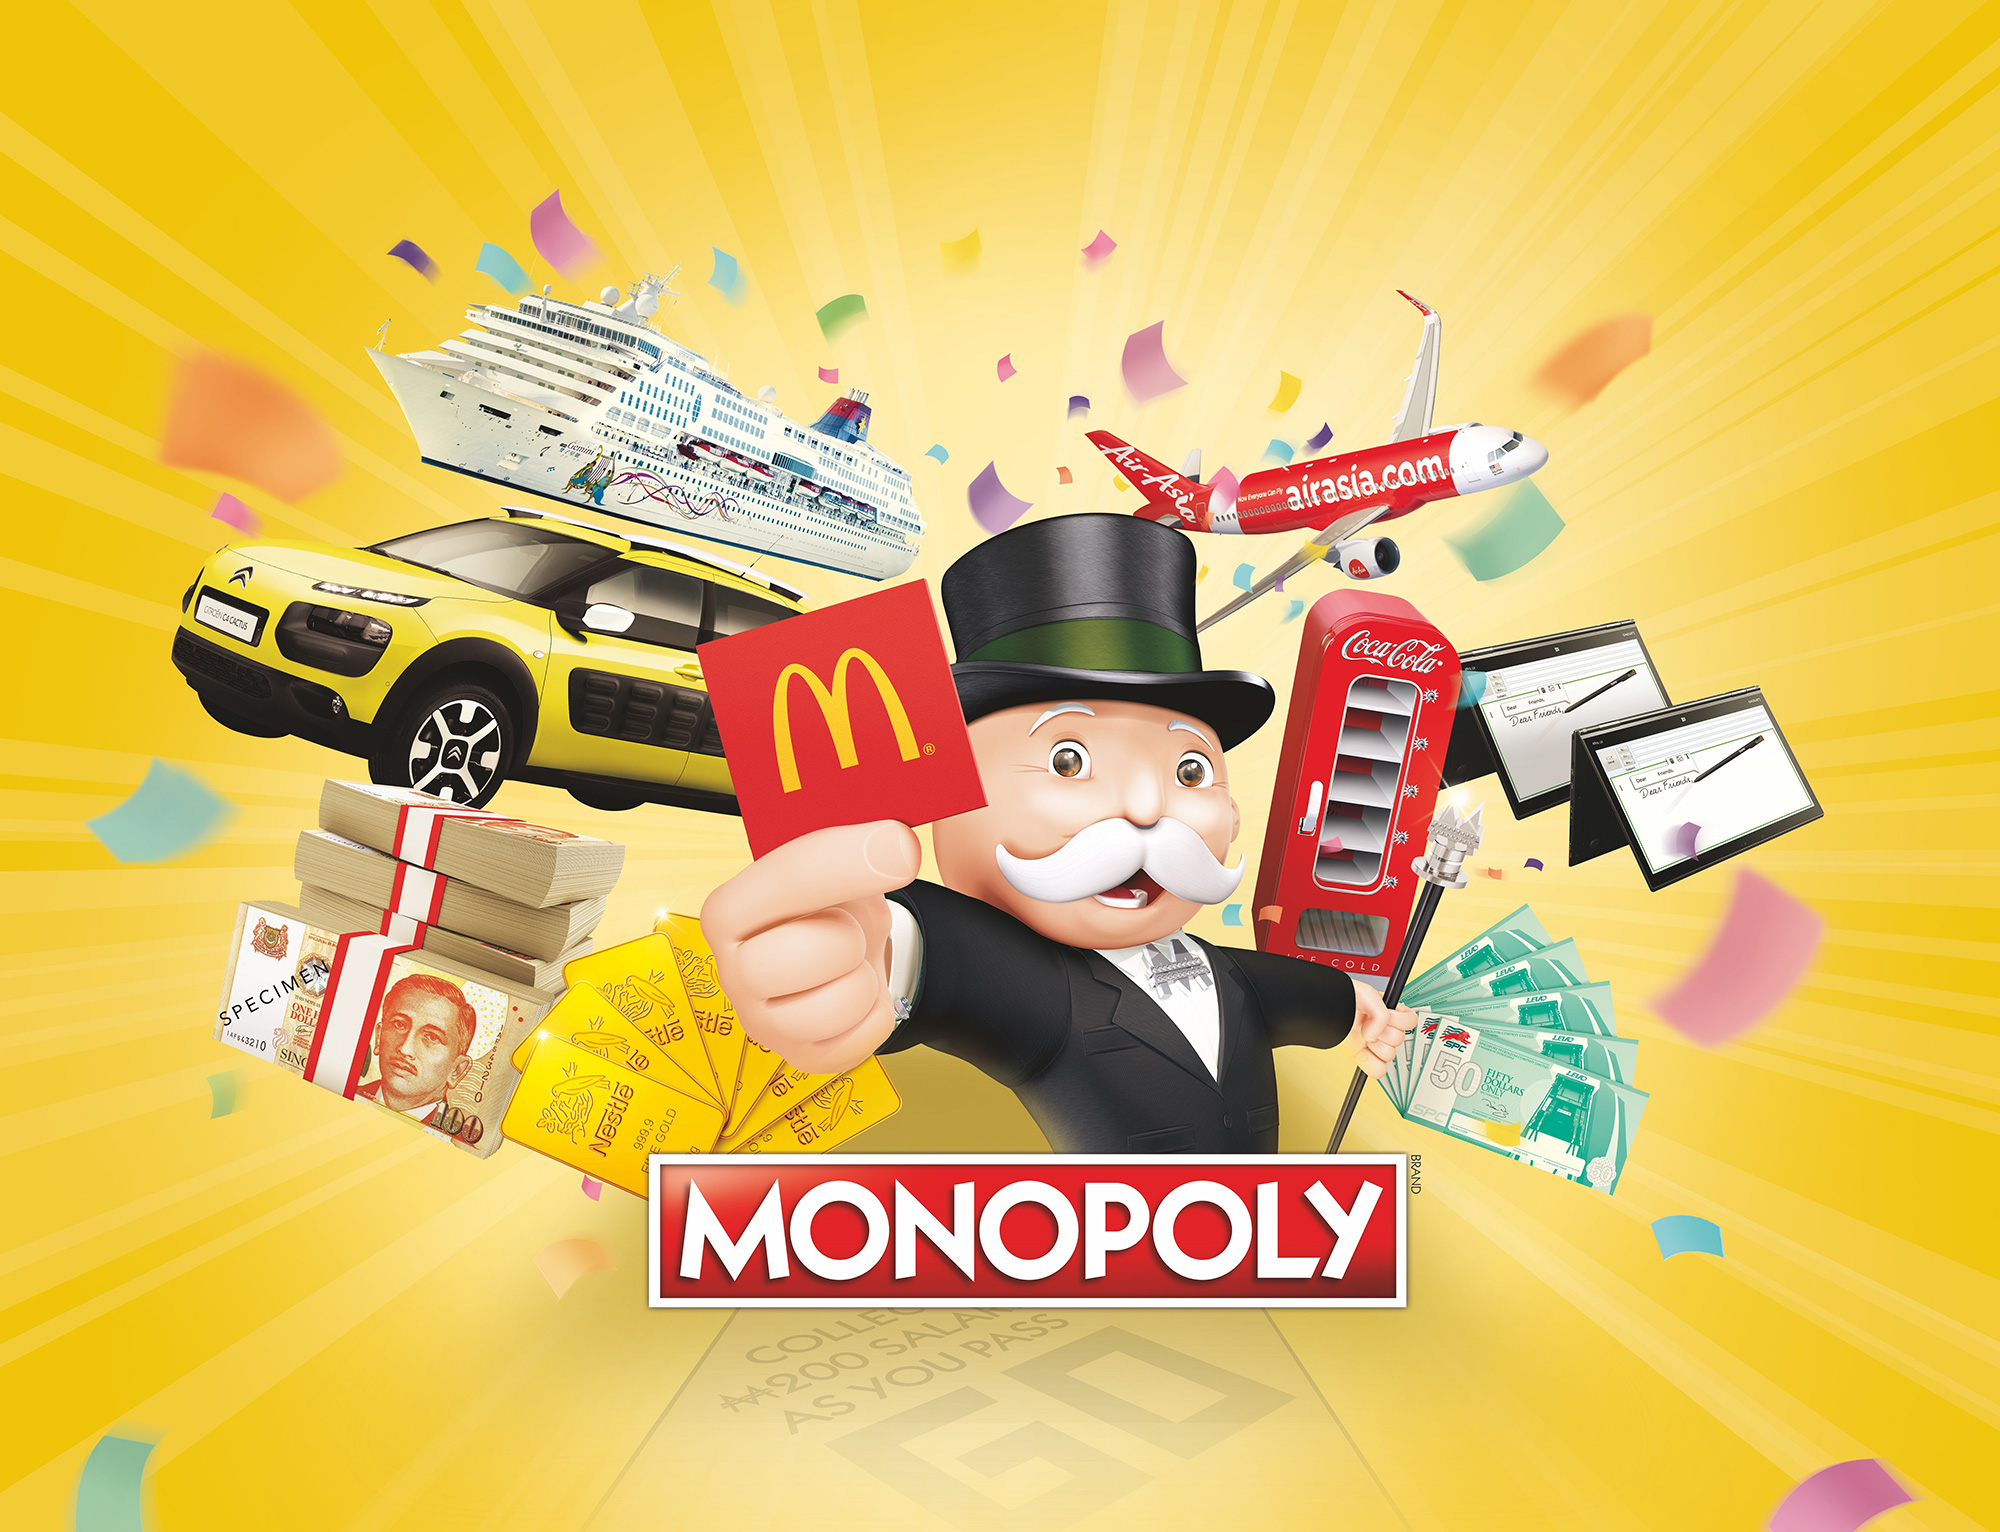 Monopoly Game Returns to McDonald’s with up to 4 Million Prizes up for